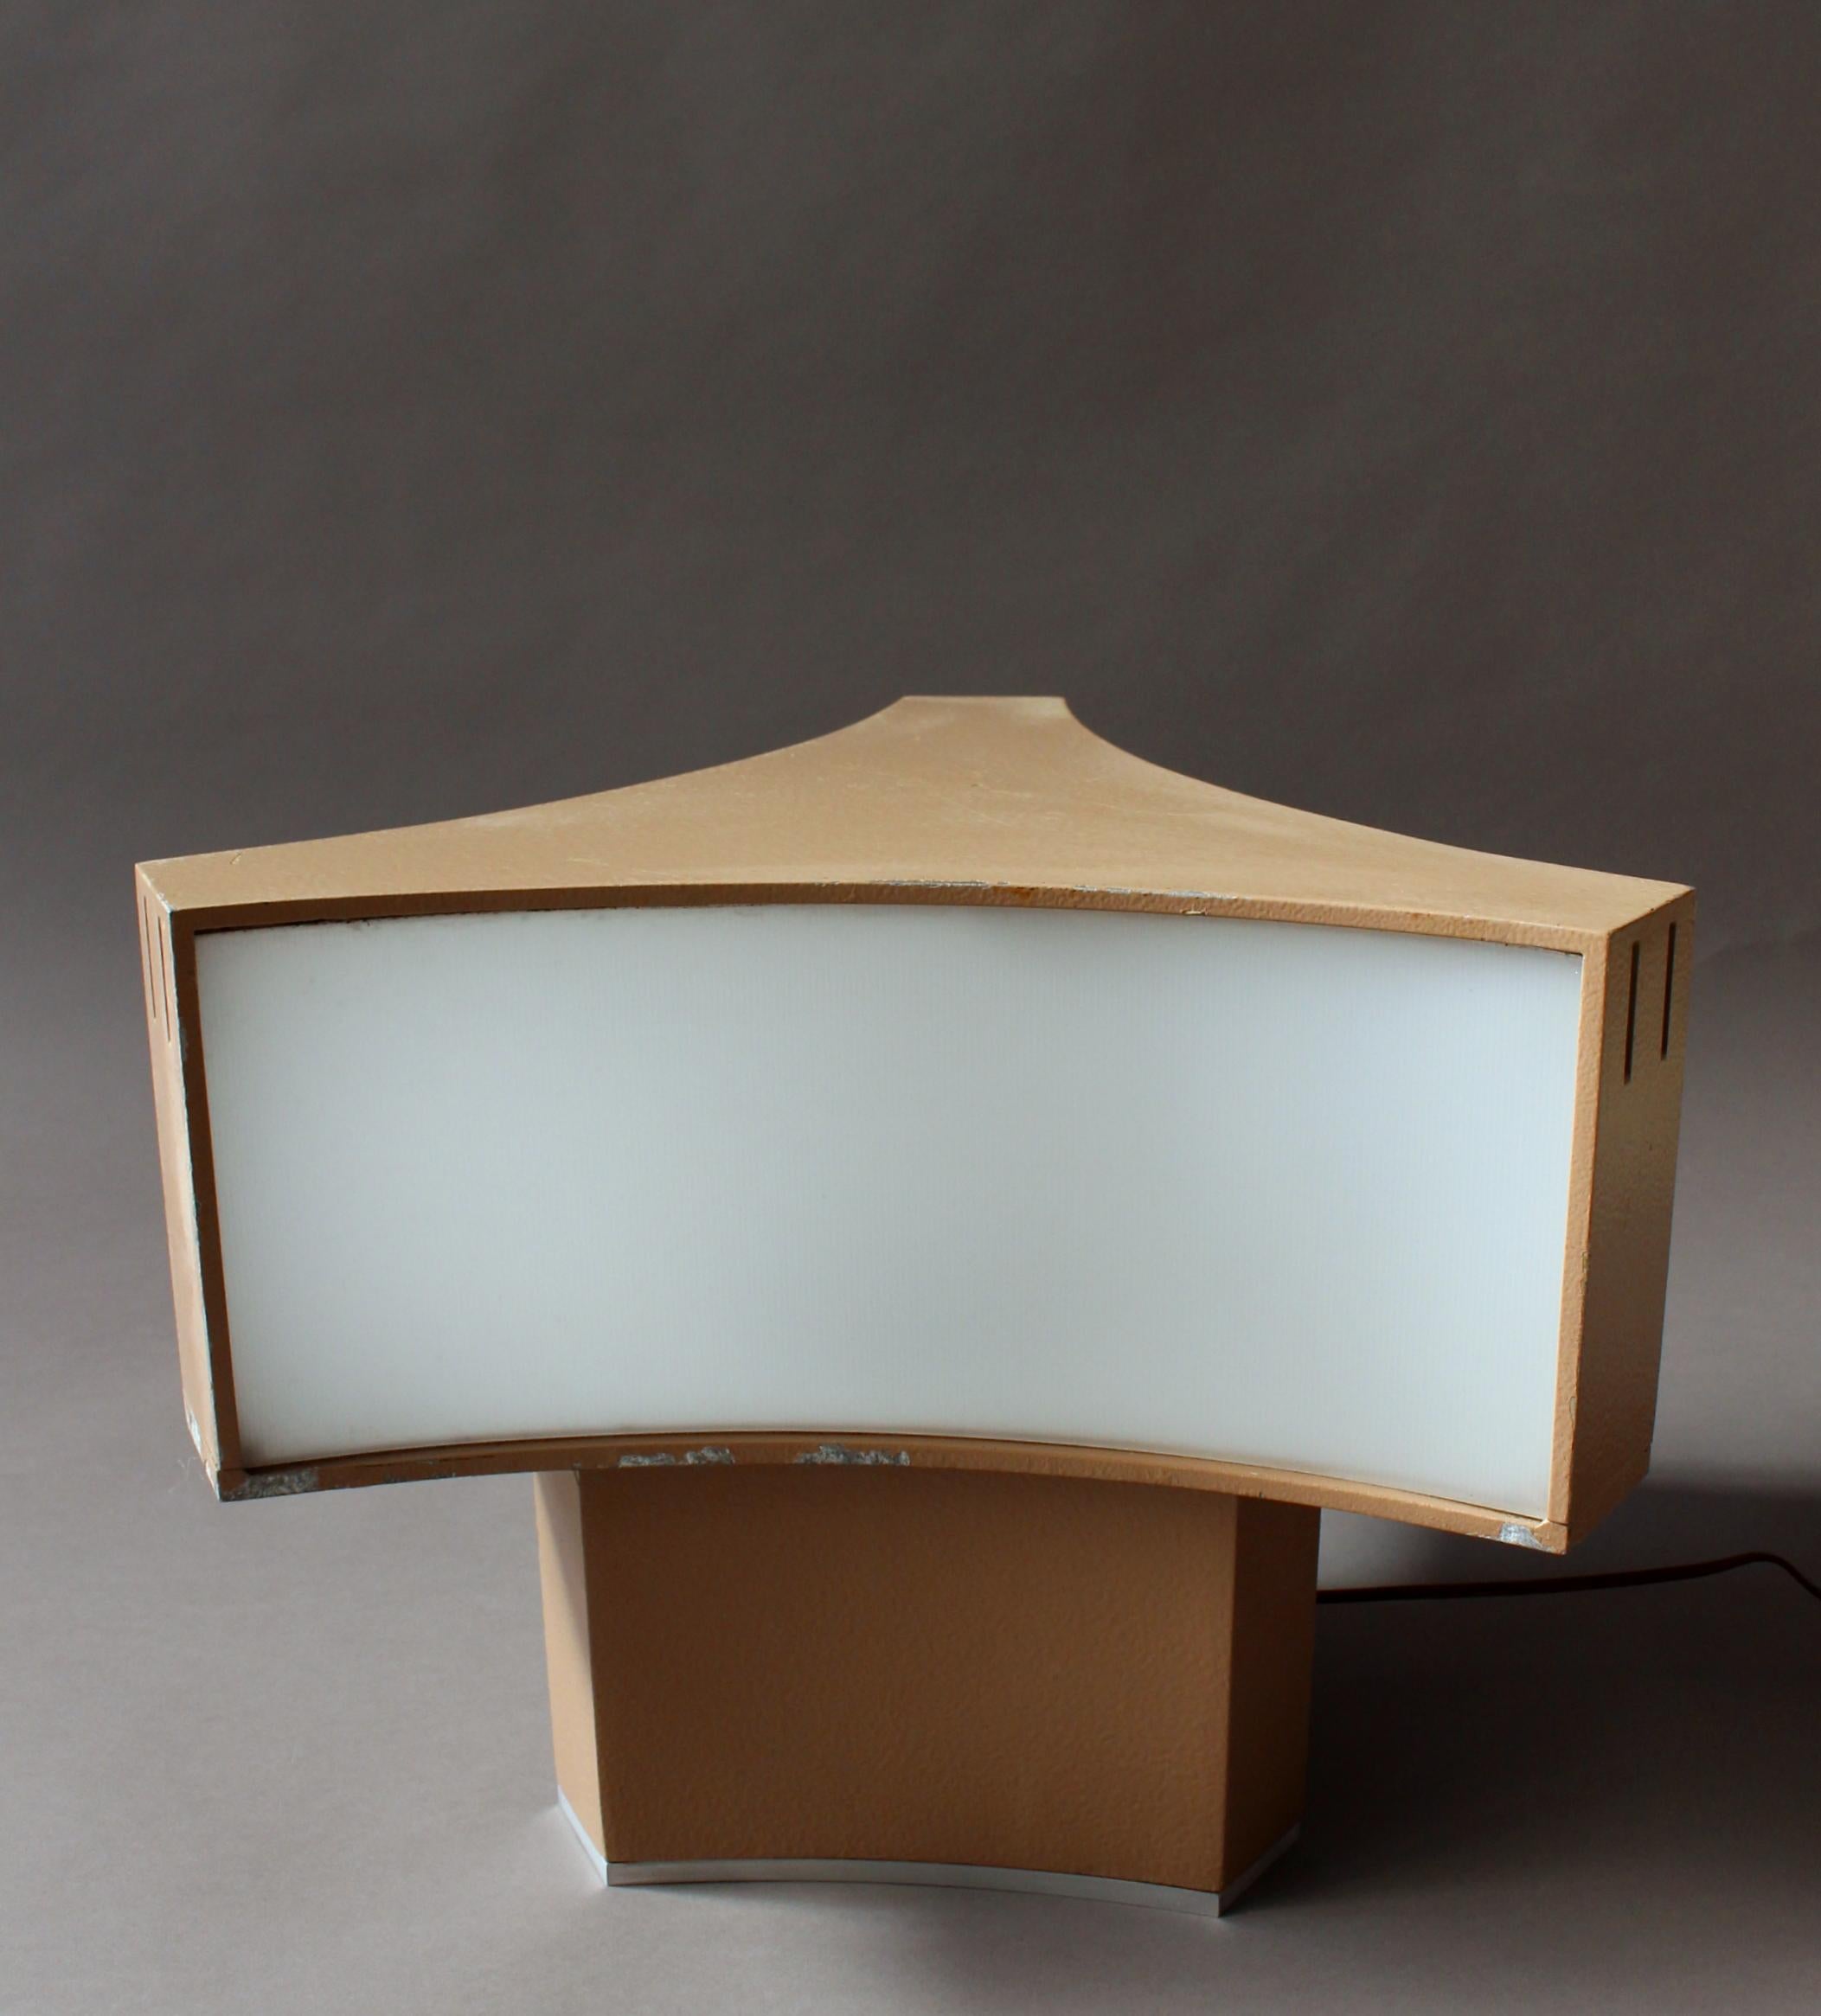 Rare French mid-century light brown lacquered metal table lamp with curved Plexiglas diffusers by Jean Perzel.
Signed.